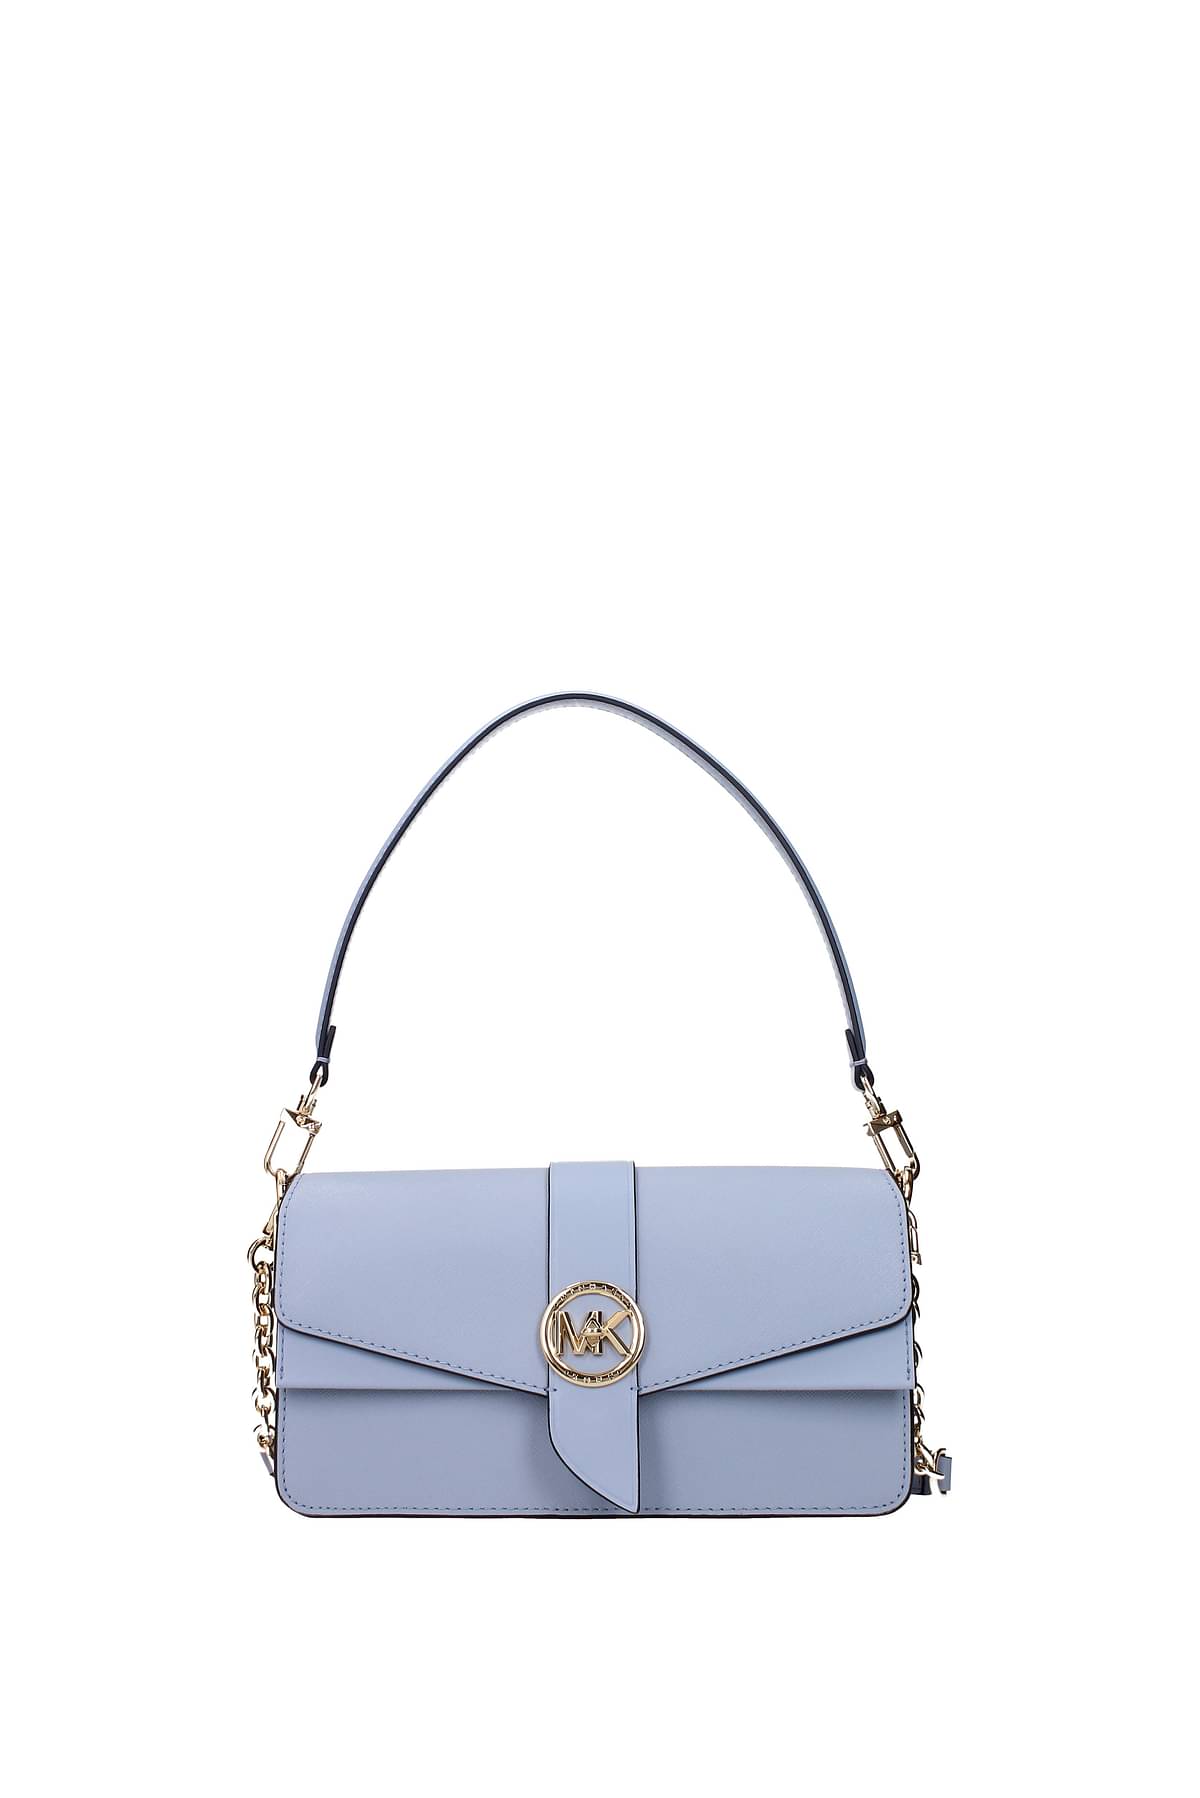 Michael Kors Outlet: Michael Greenwich bag in leather - Leather